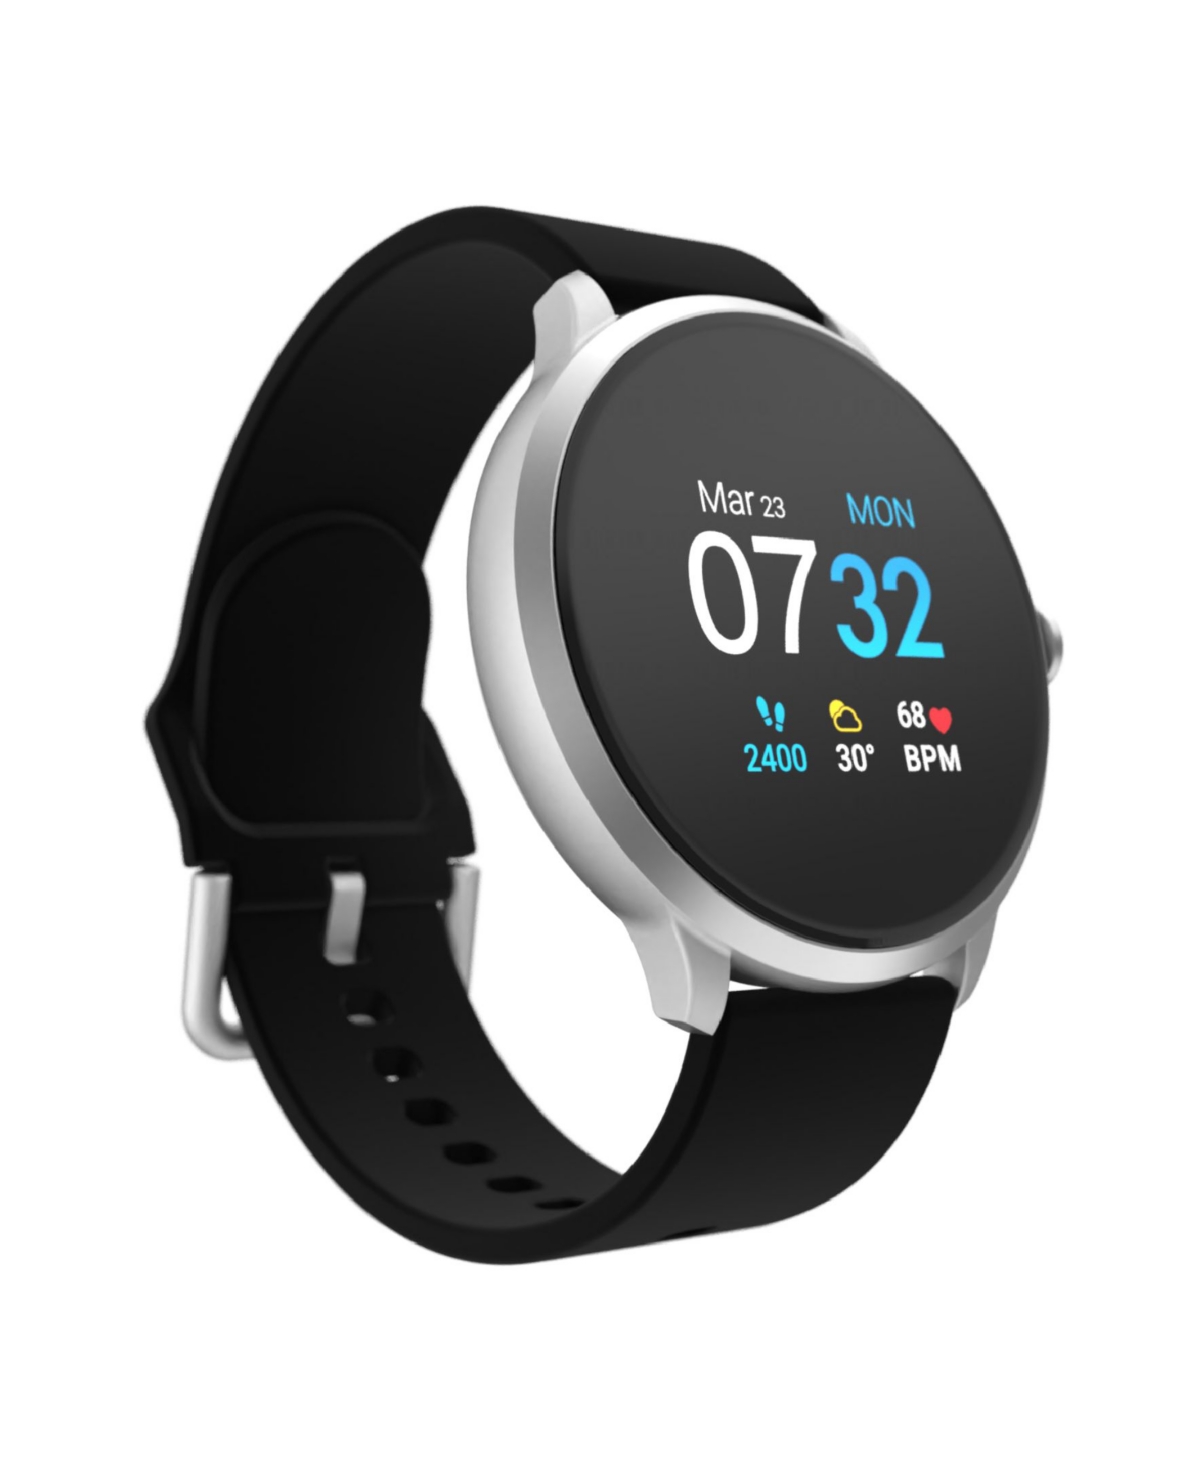 Itouch Sport 3 Unisex Touchscreen Smartwatch: Silver Case with Black Strap 45mm